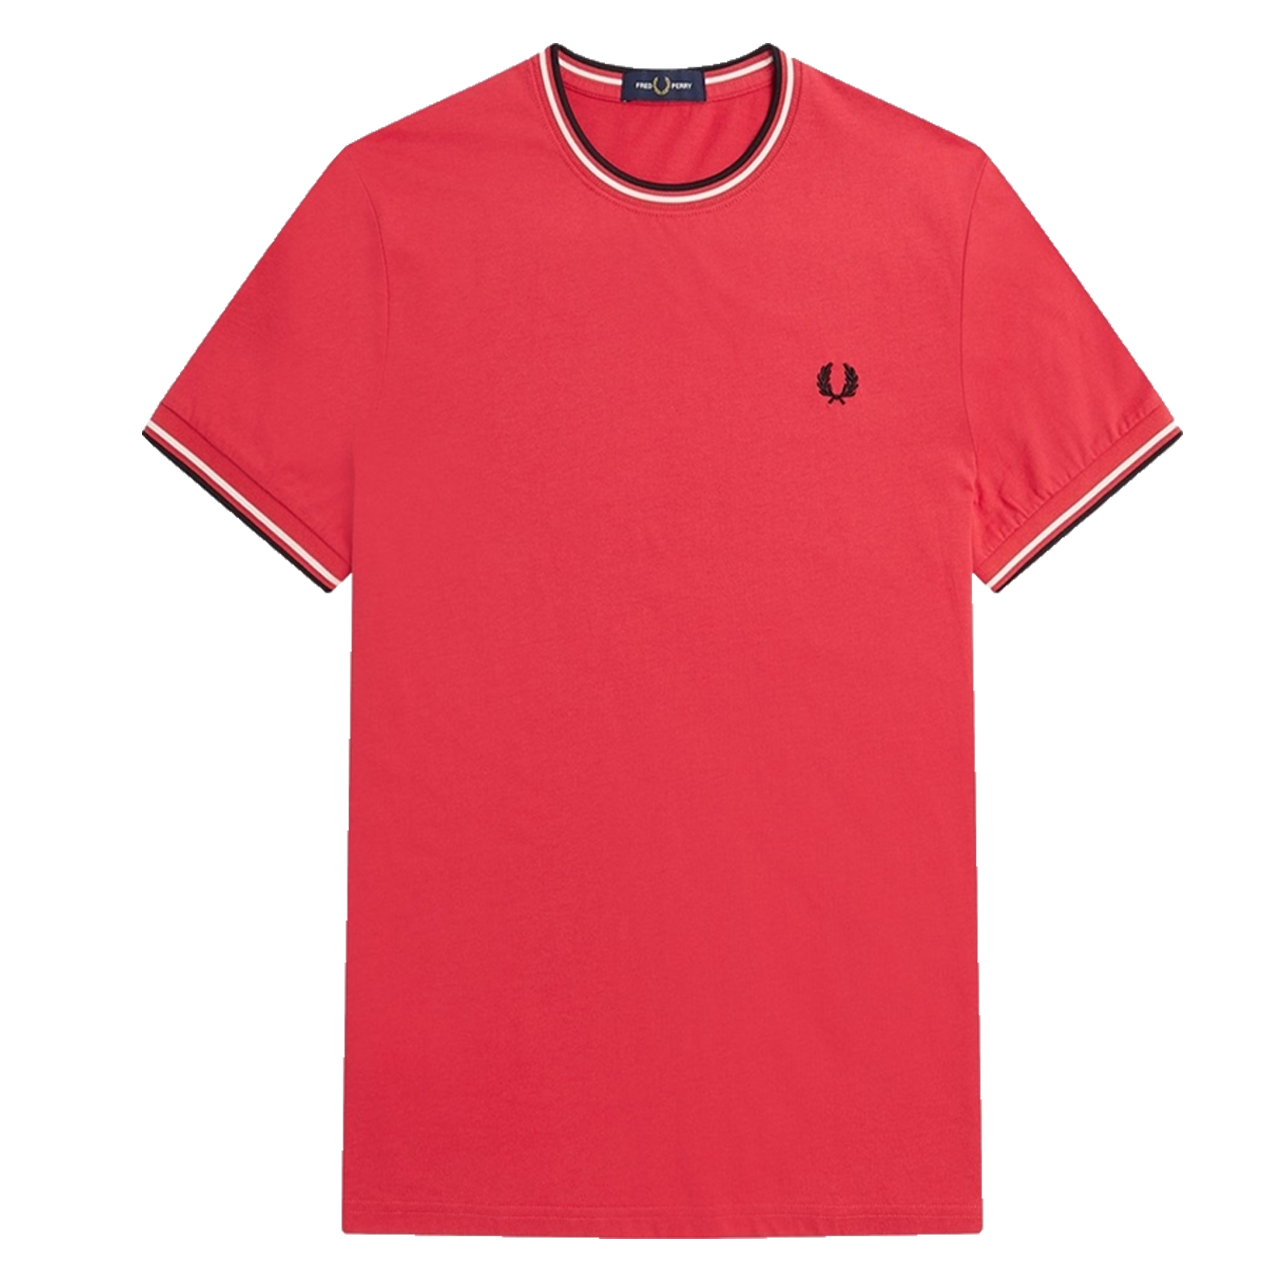 FRED PERRY TWIN TIPPED TEE WASHED RED M1588-279